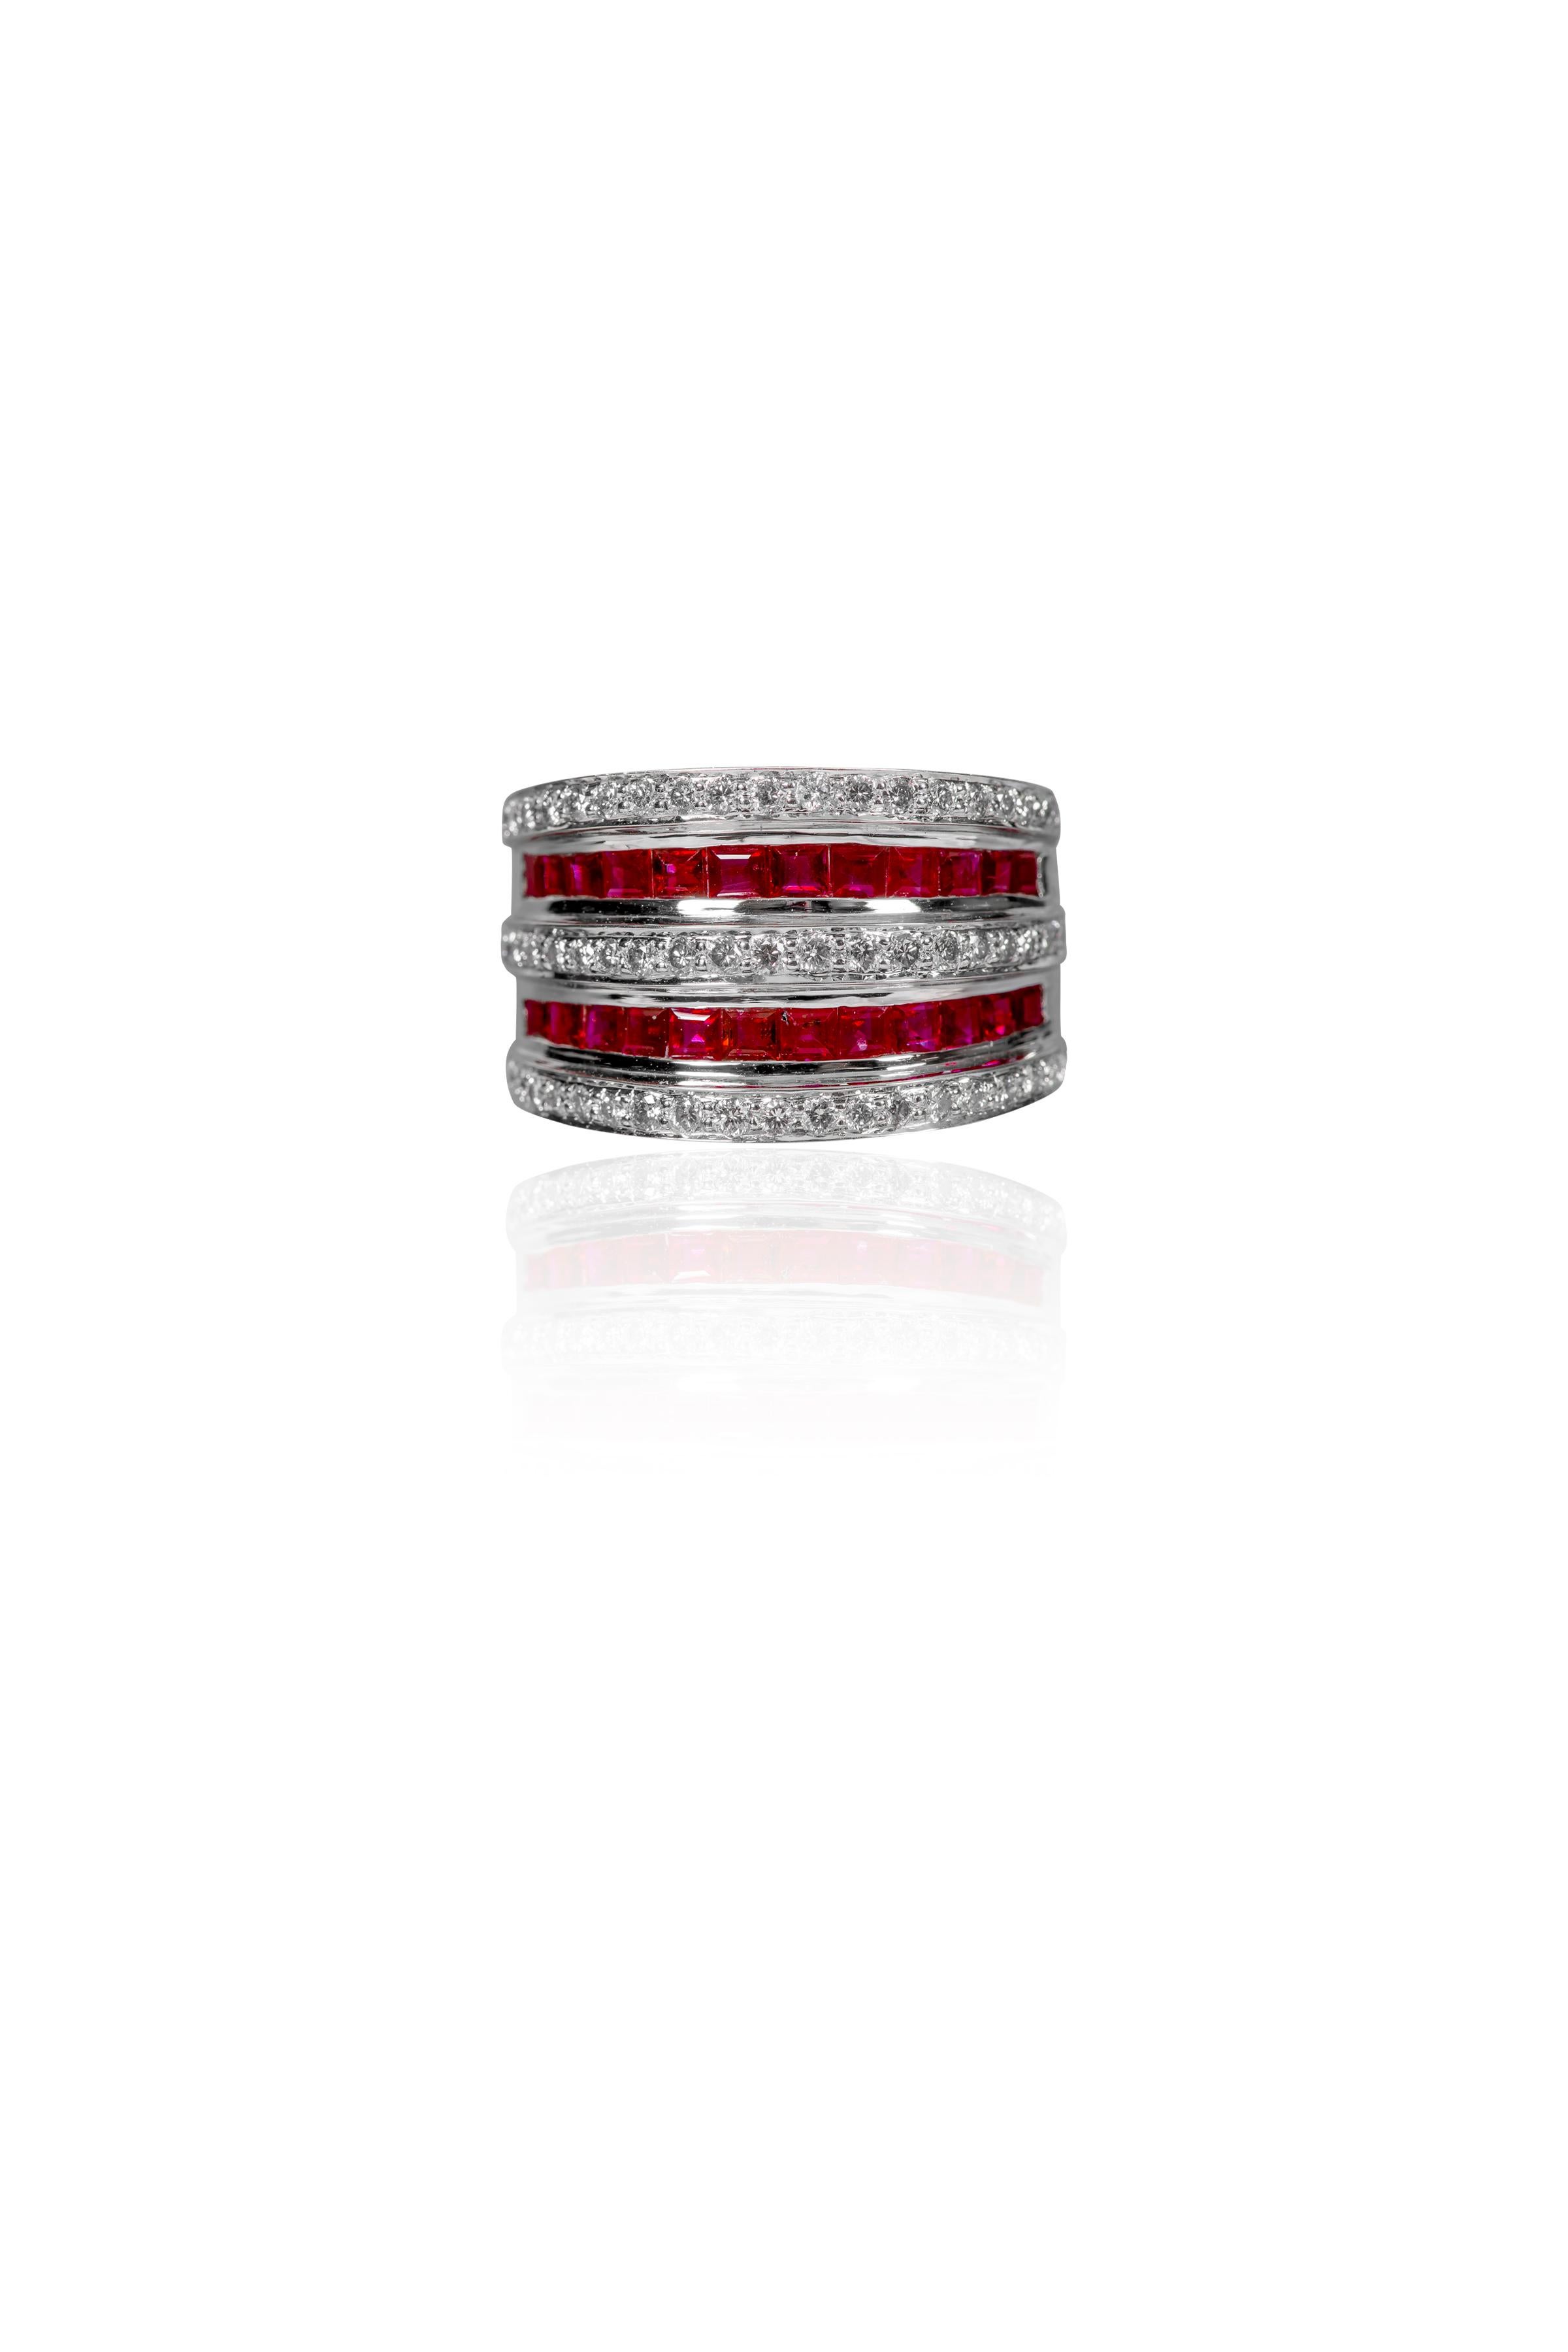 18 Karat White Gold 1.78 Carat Ruby and Diamond Cocktail Band Ring For Sale 2